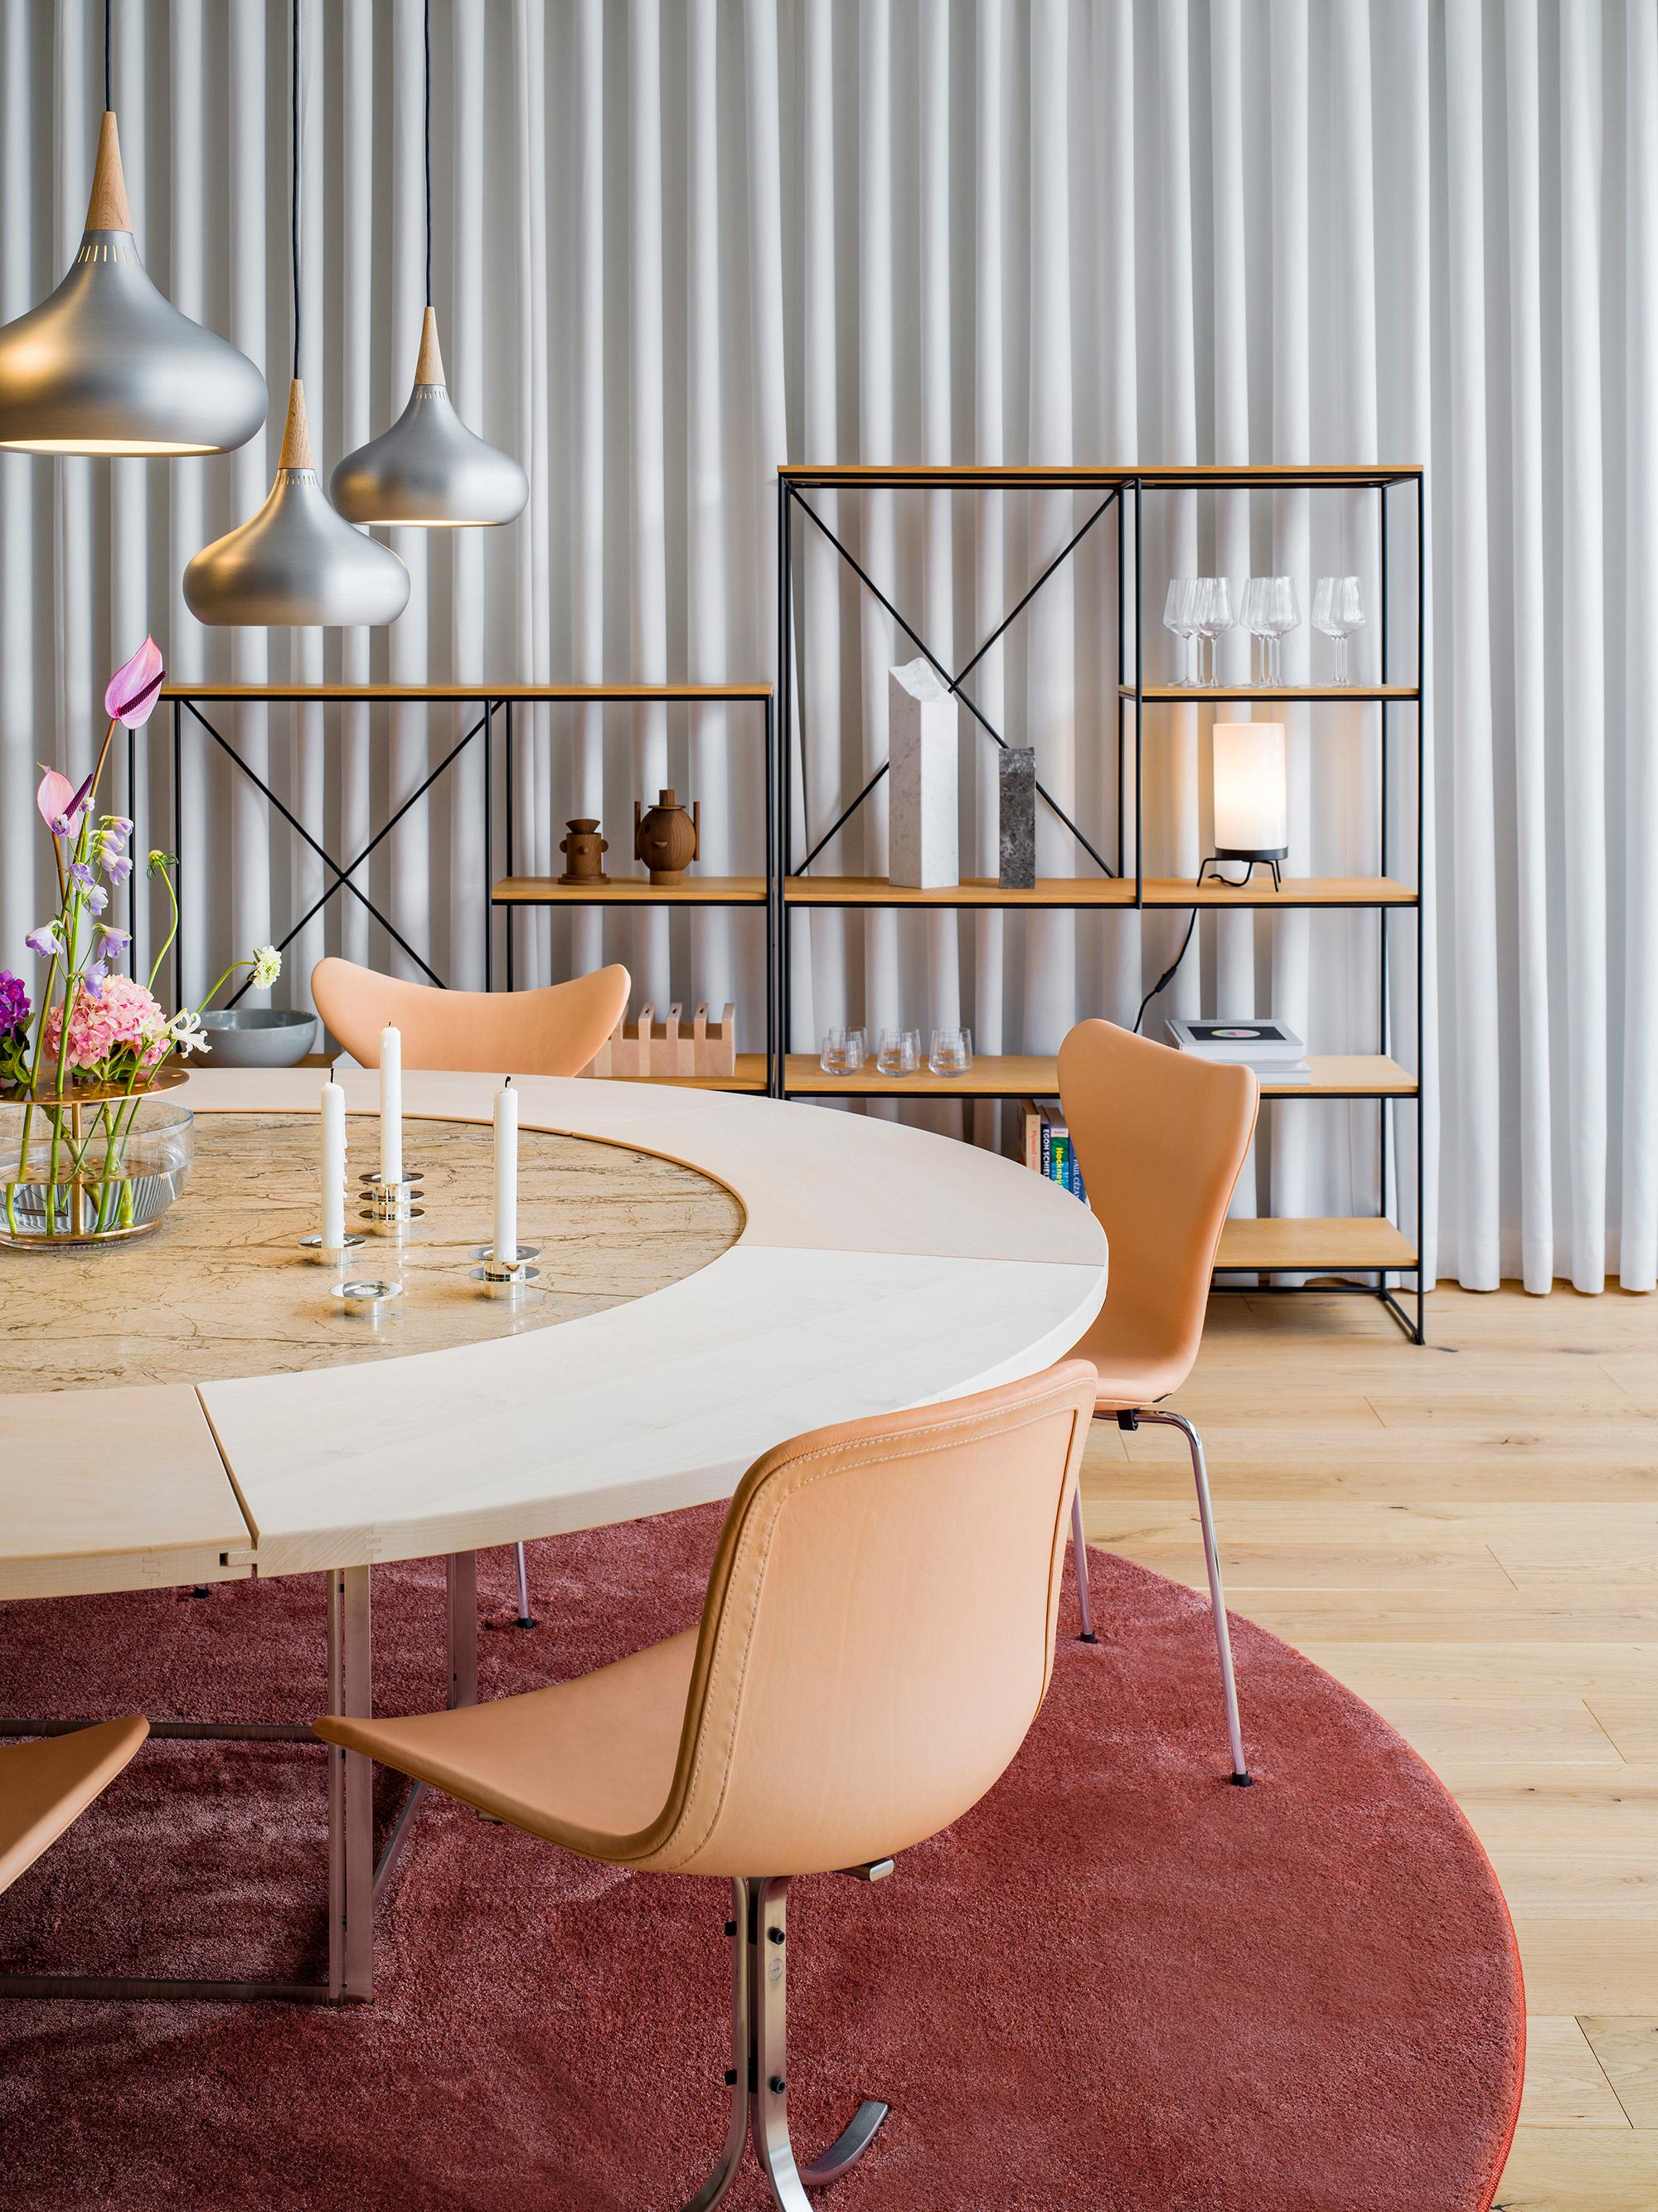 Poul Kjærholm 'PK9' Dining Chair for Fritz Hansen in Aura Leather.

Established in 1872, Fritz Hansen has become synonymous with legendary Danish design. Combining timeless craftsmanship with an emphasis on sustainability, the brand’s re-editions of